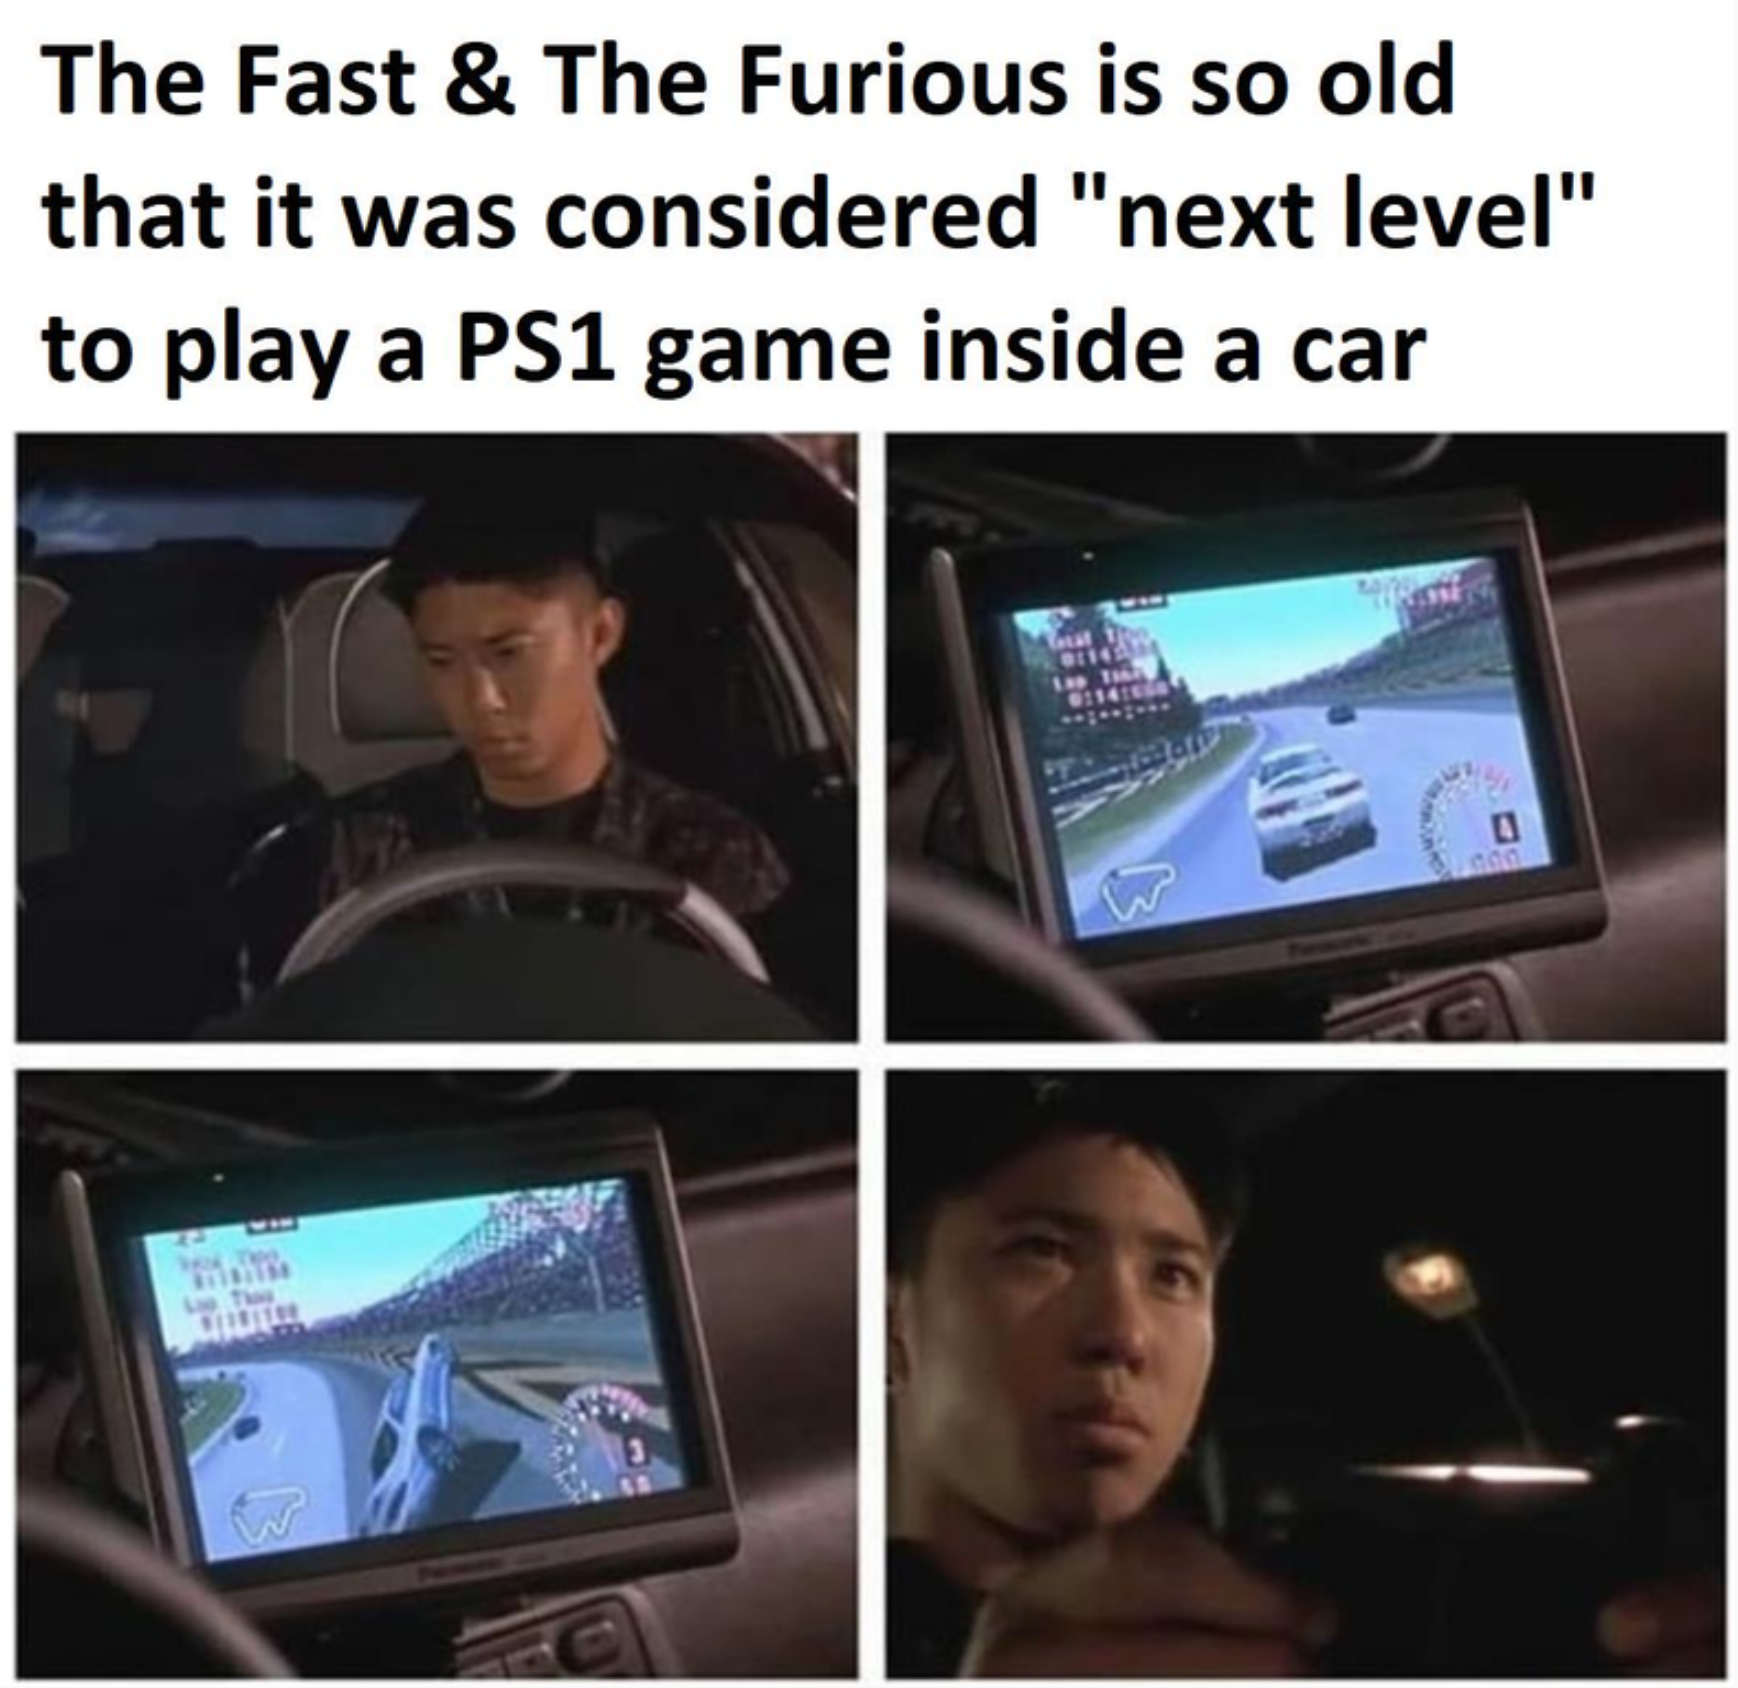 fast and furious 1 memes - The Fast & The Furious is so old that it was considered "next level" to play a PS1 game inside a car